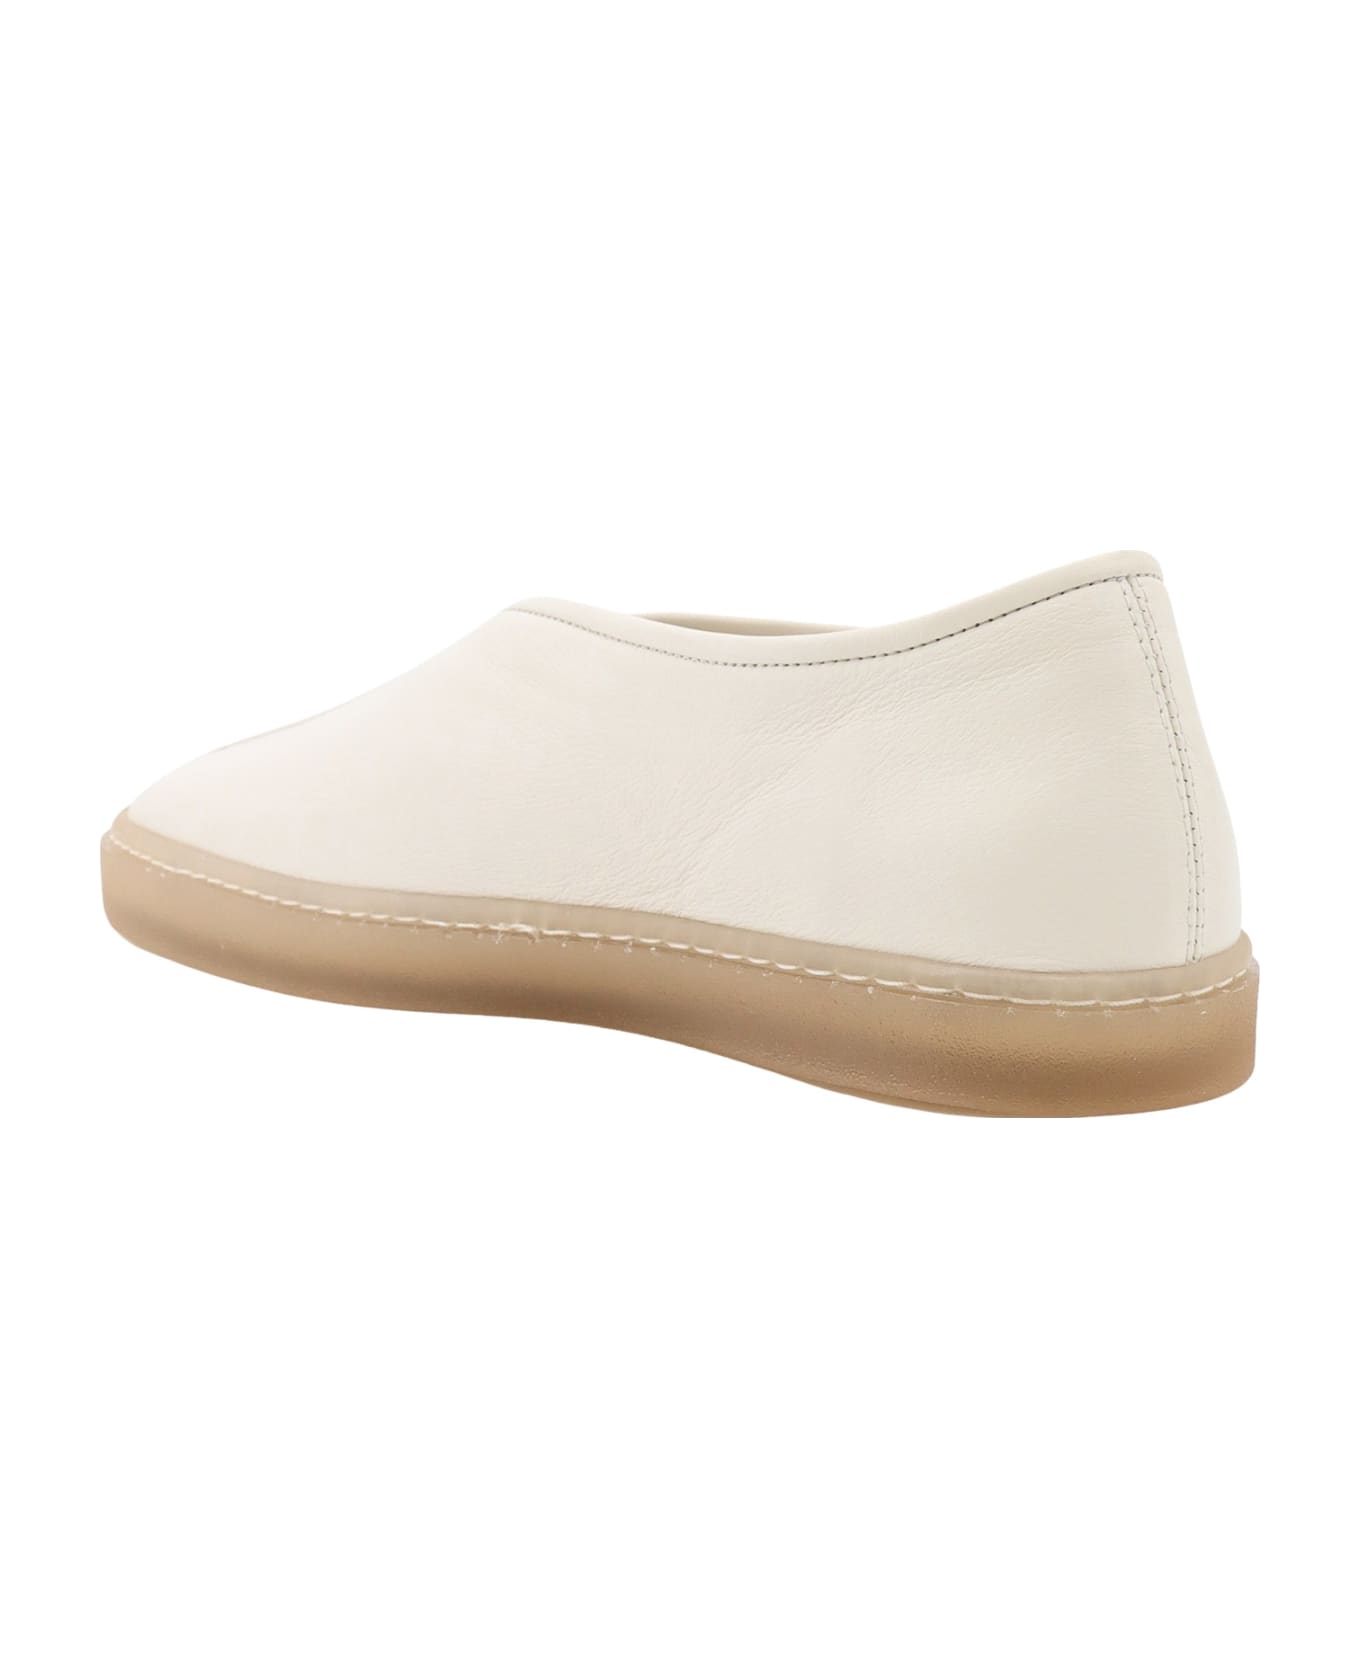 Lemaire Piped Sneakers - White